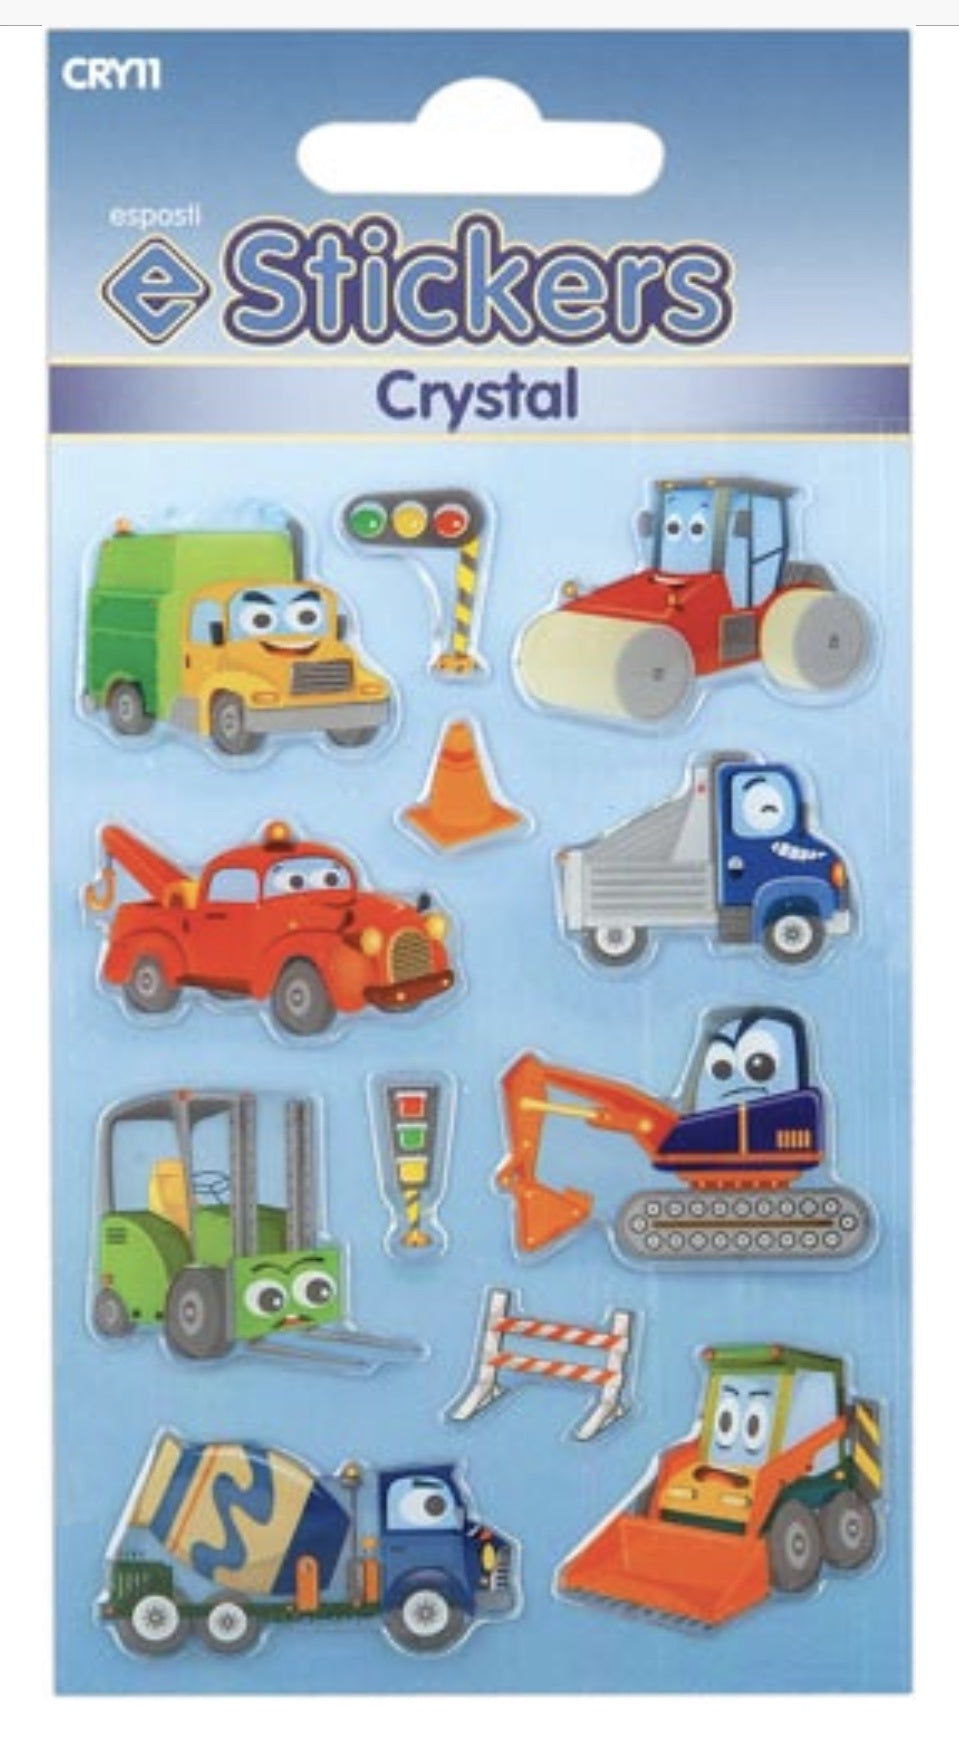 Crystal Stickers Comic Construction